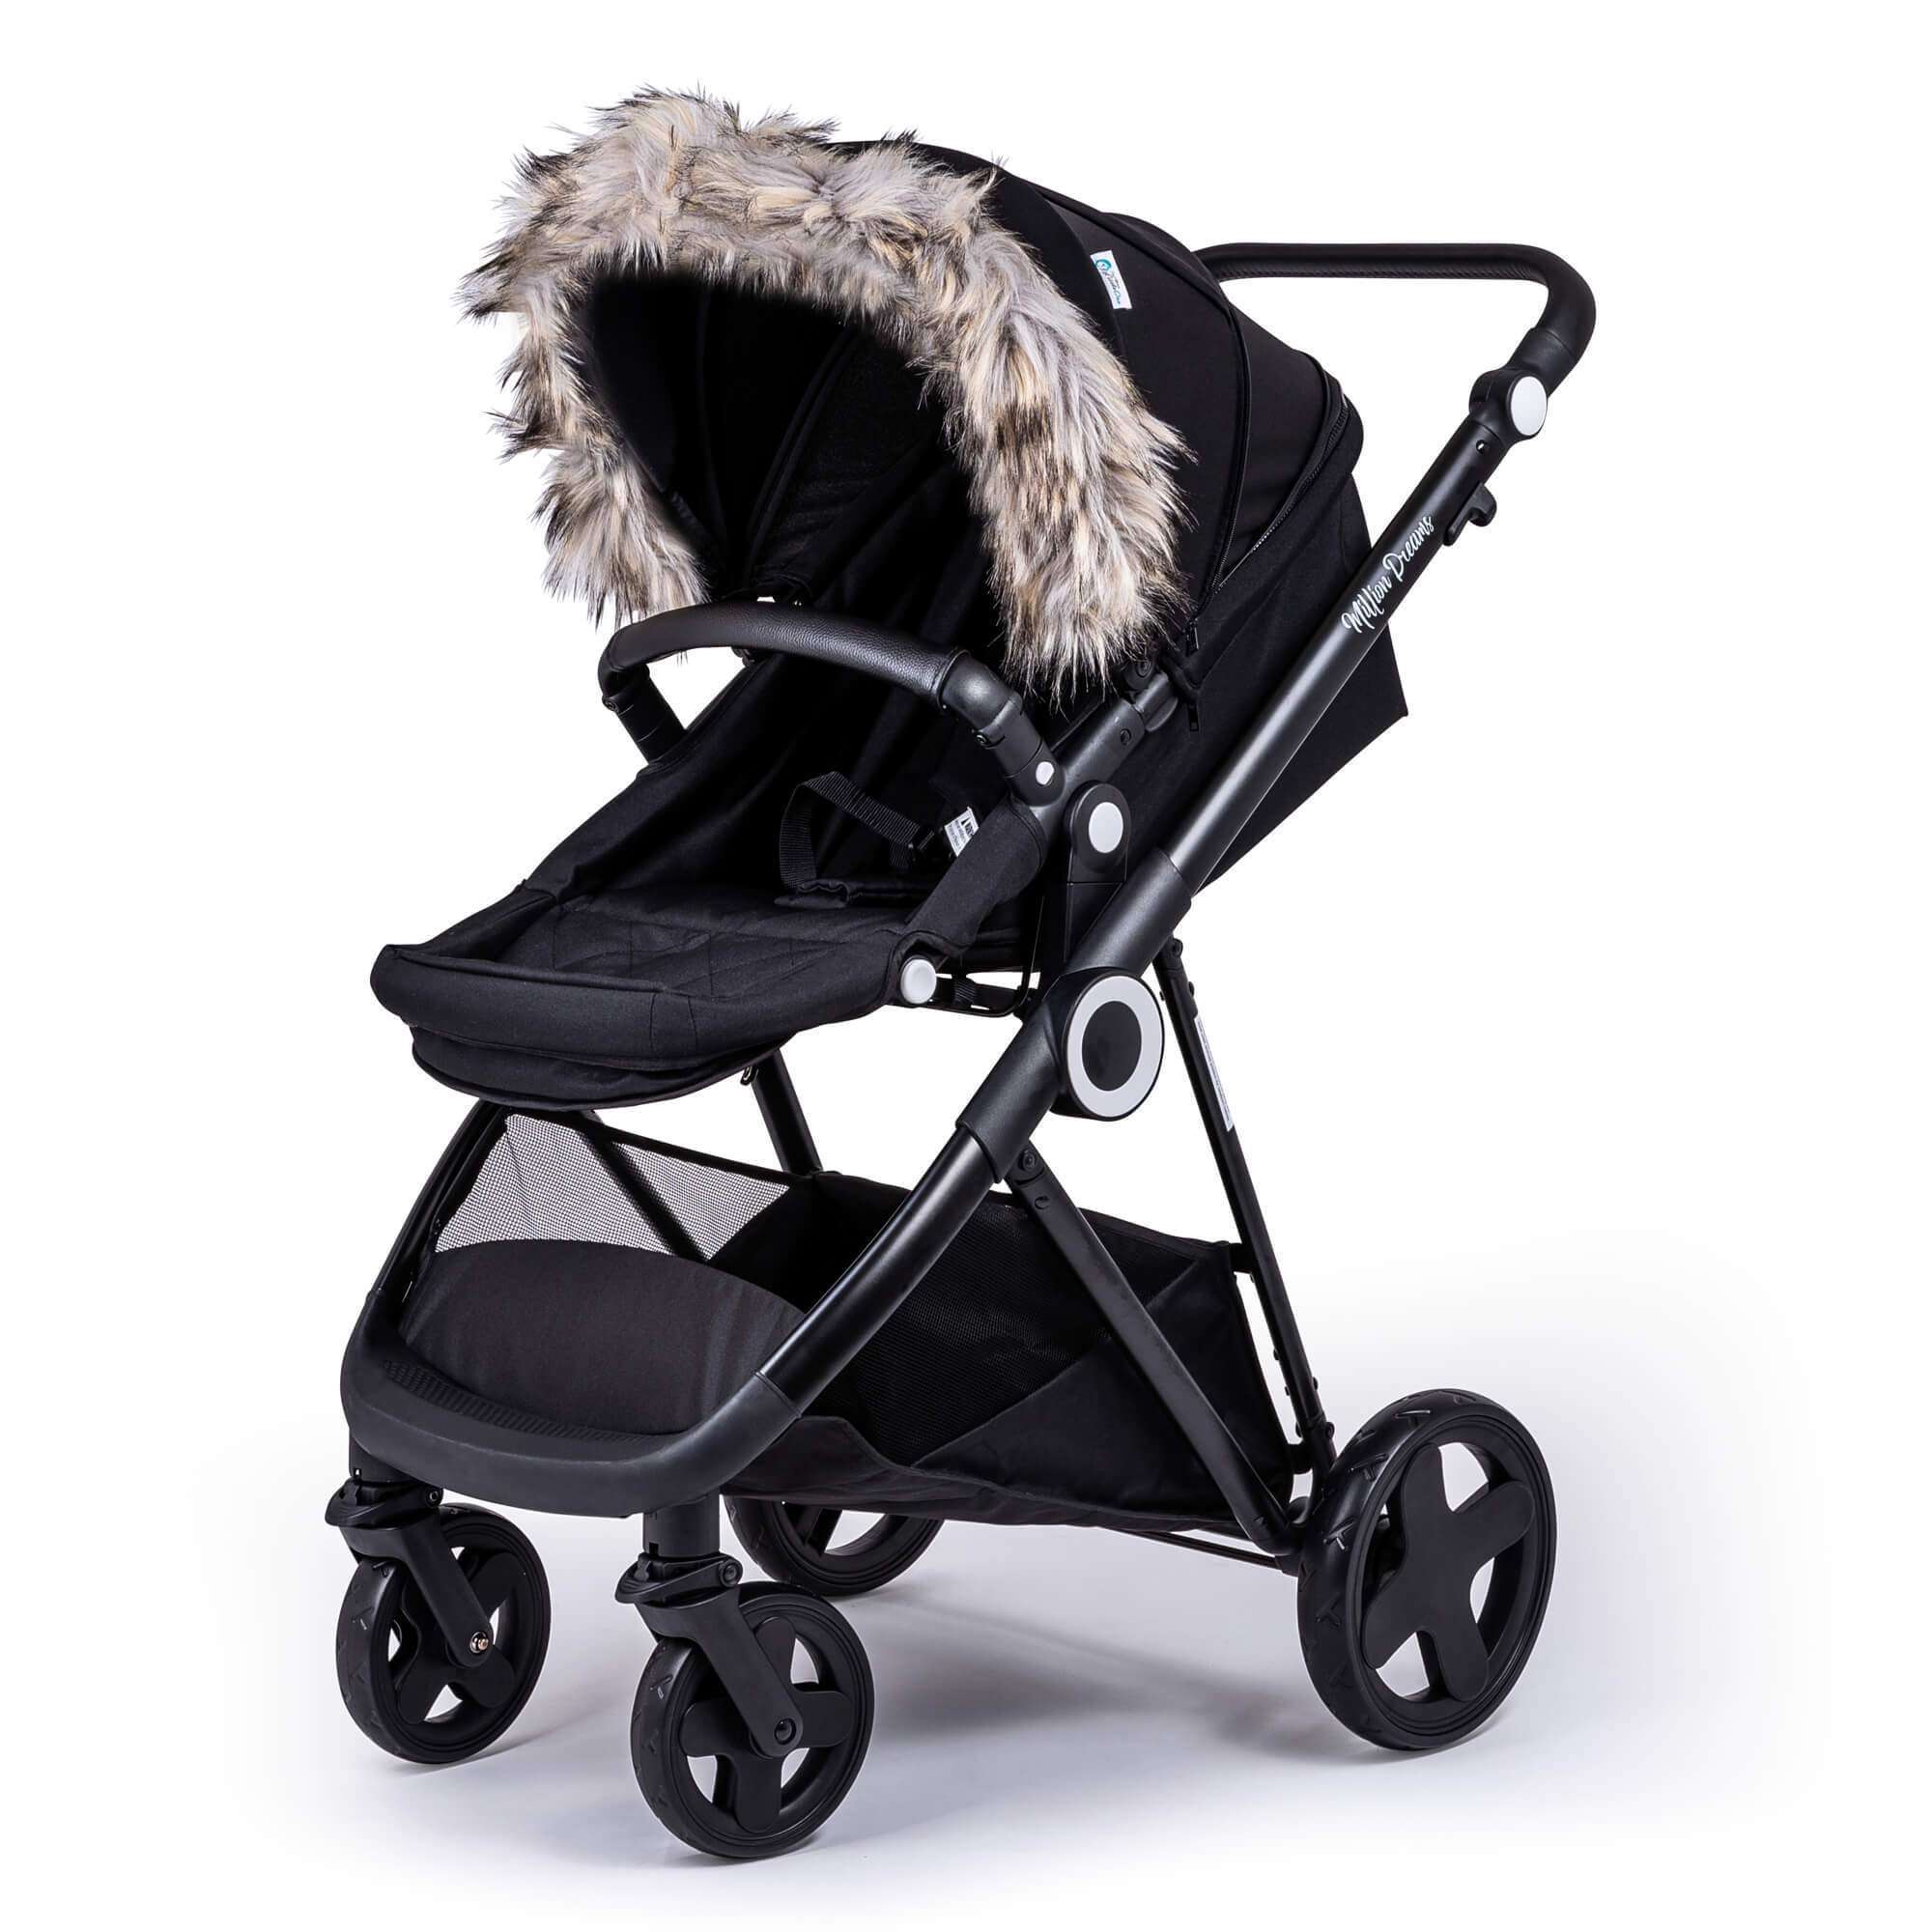 Pram Fur Hood Trim Attachment for Pushchair Compatible with Uppababy - Light Grey / Fits All Models | For Your Little One